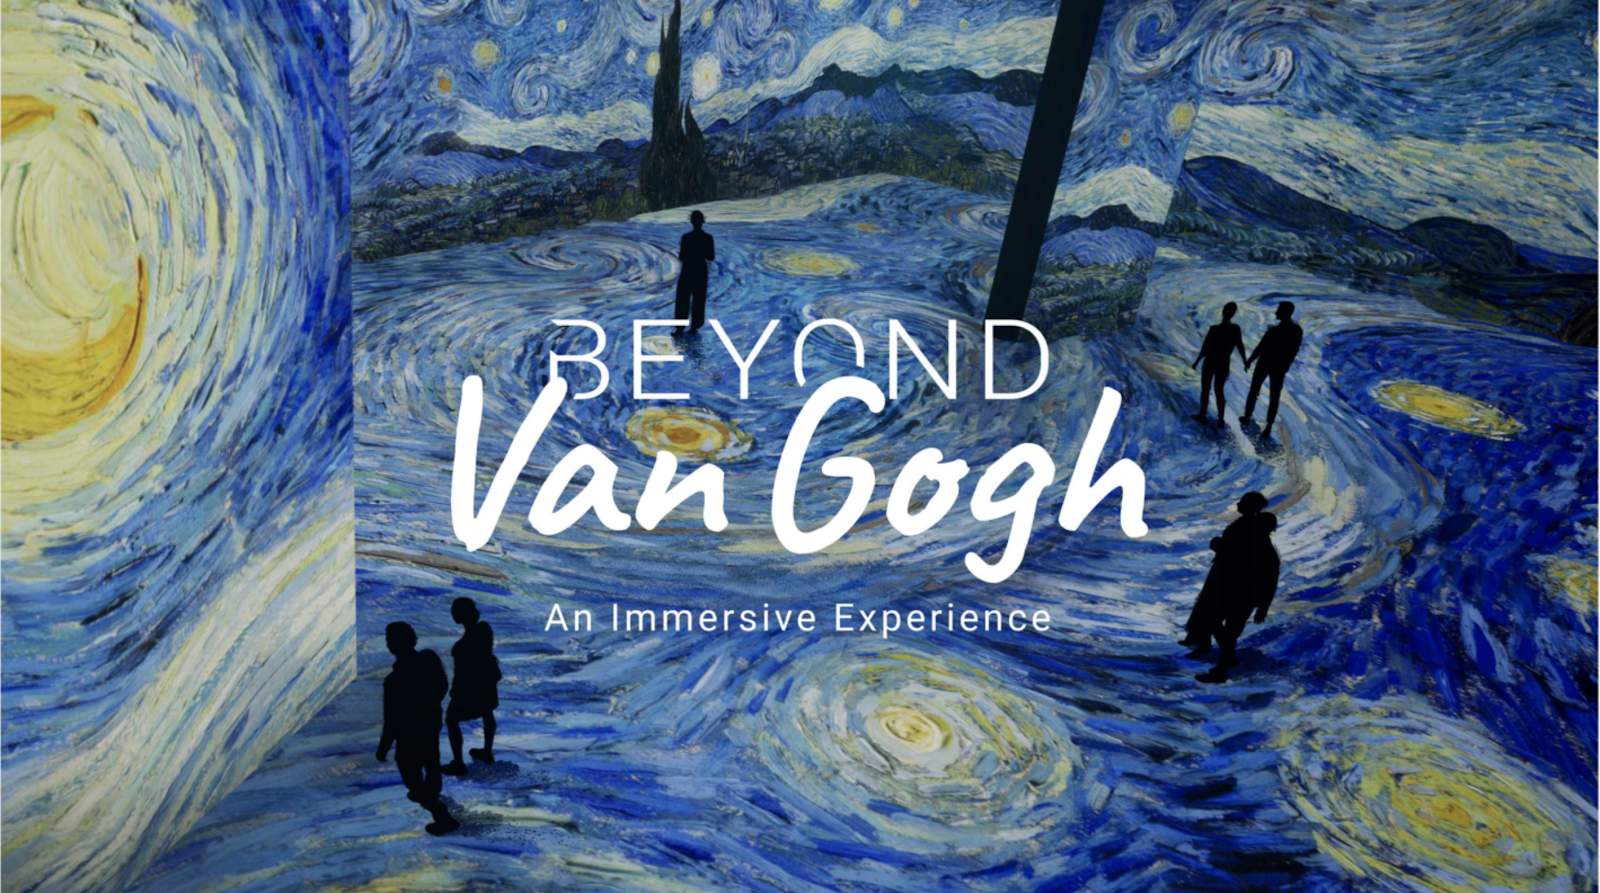 You can walk through Van Gogh’s paintings at this 3-D art exhibit in Miami